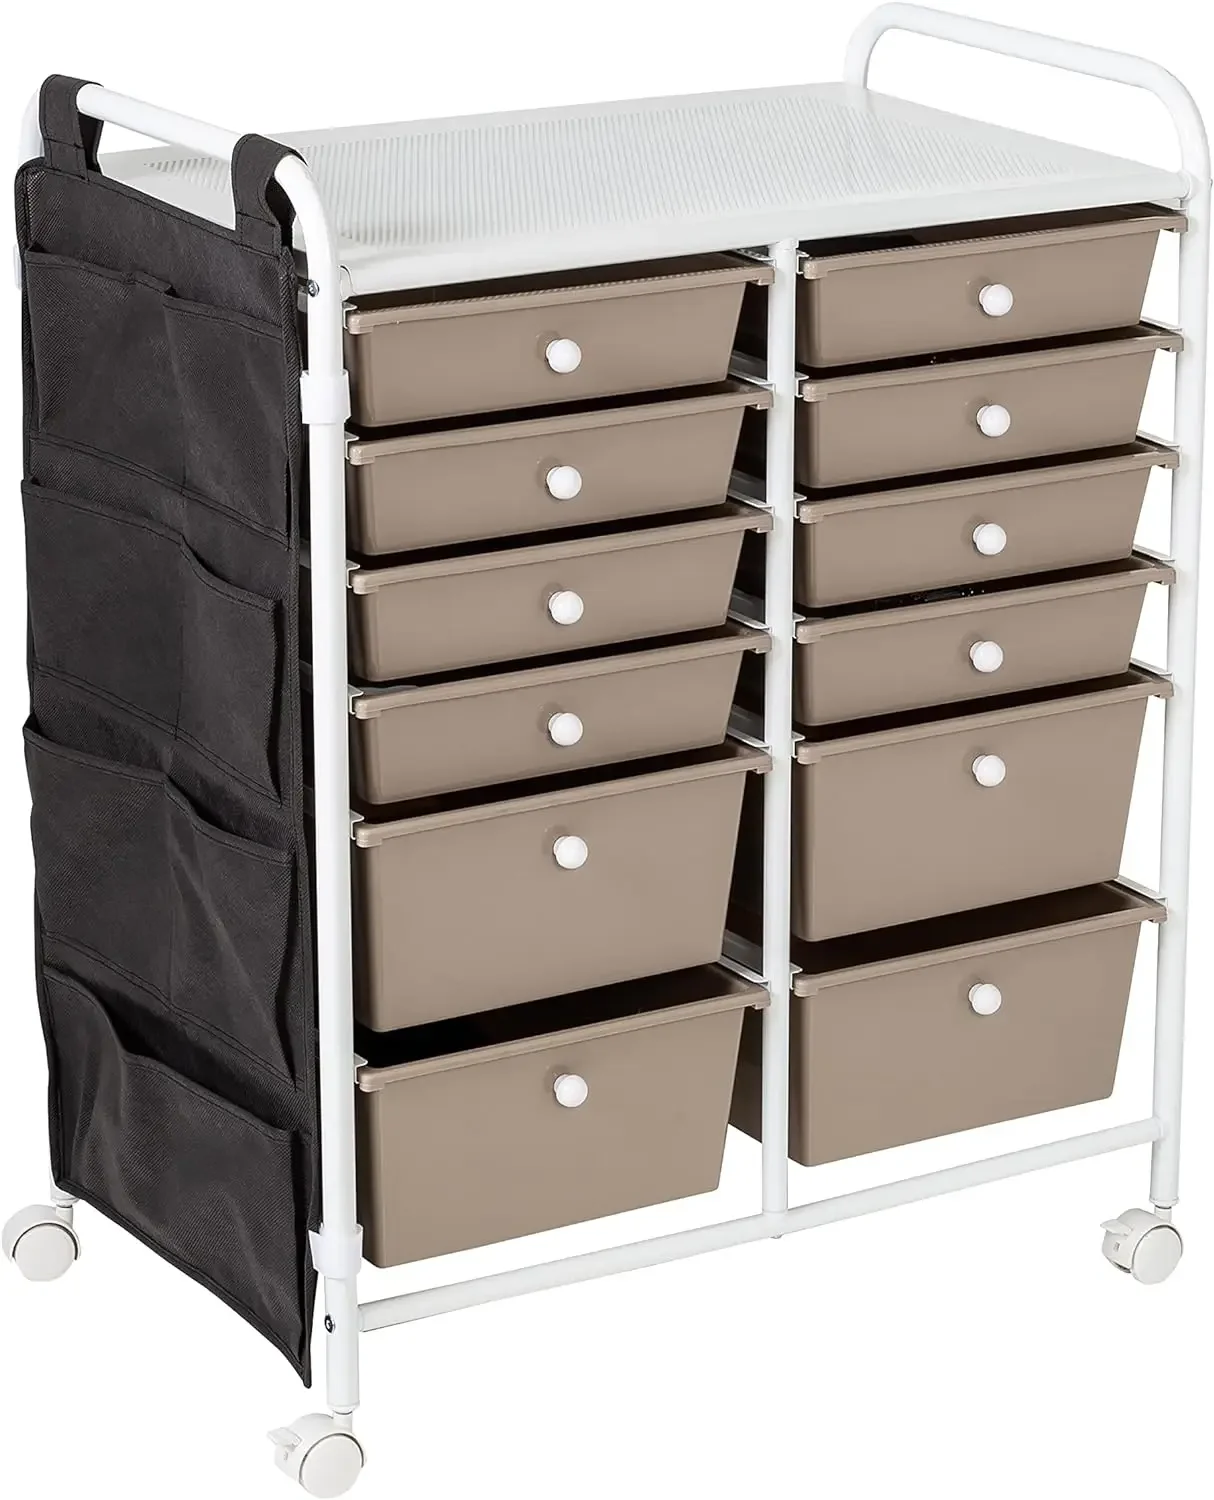 

Honey-Can-Do Honey Can Do 12-Drawer Metal Rolling Storage Cart with Side Pockets CRT-09104 White